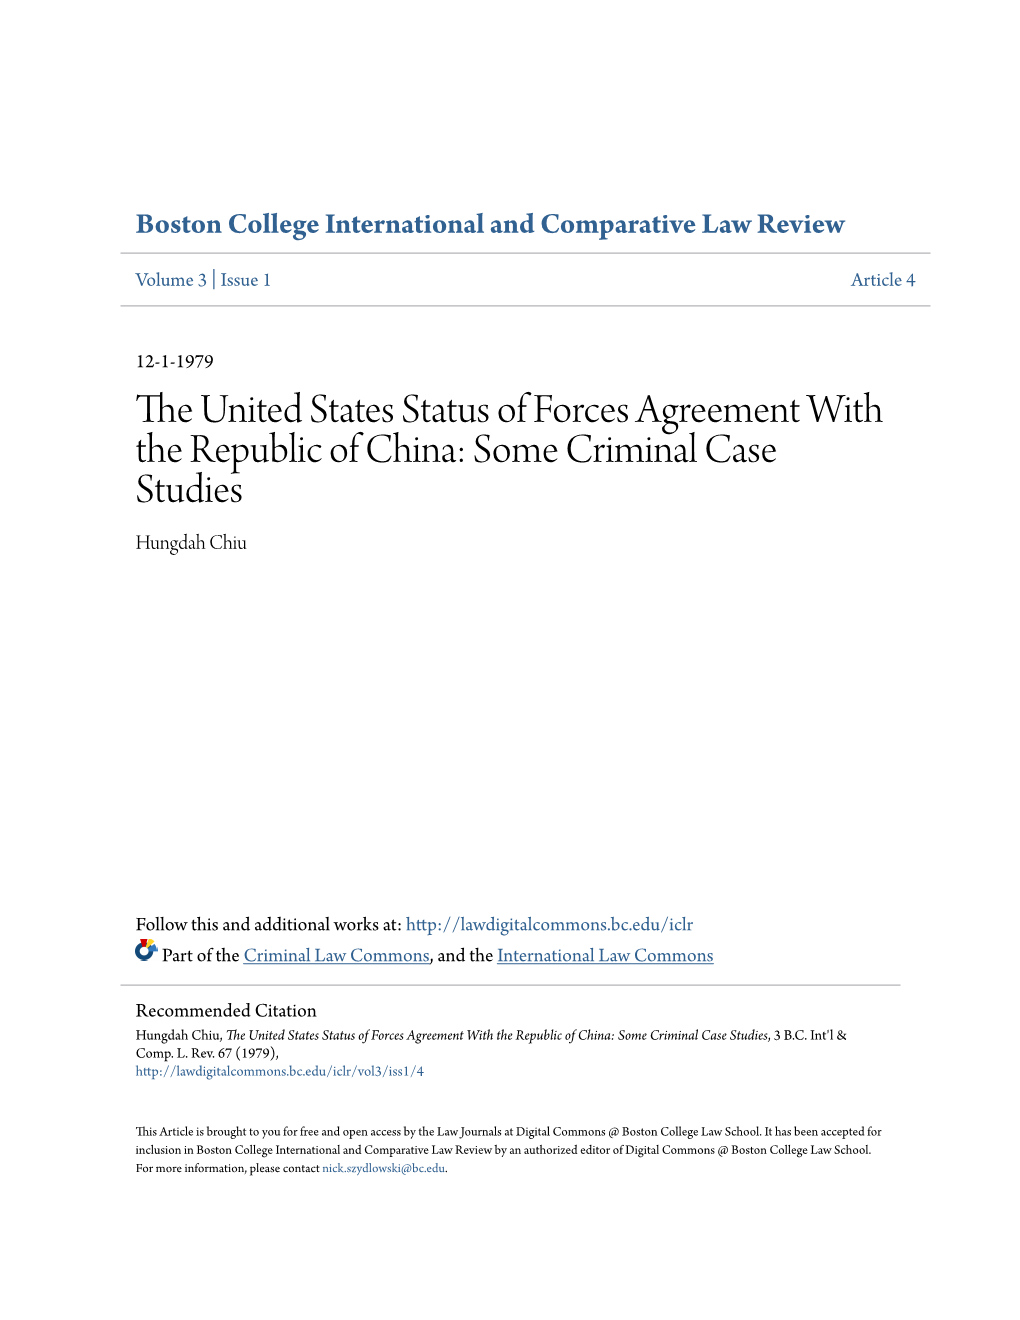 The United States Status of Forces Agreement with the Republic of China: Some Criminal Case Studies, 3 B.C